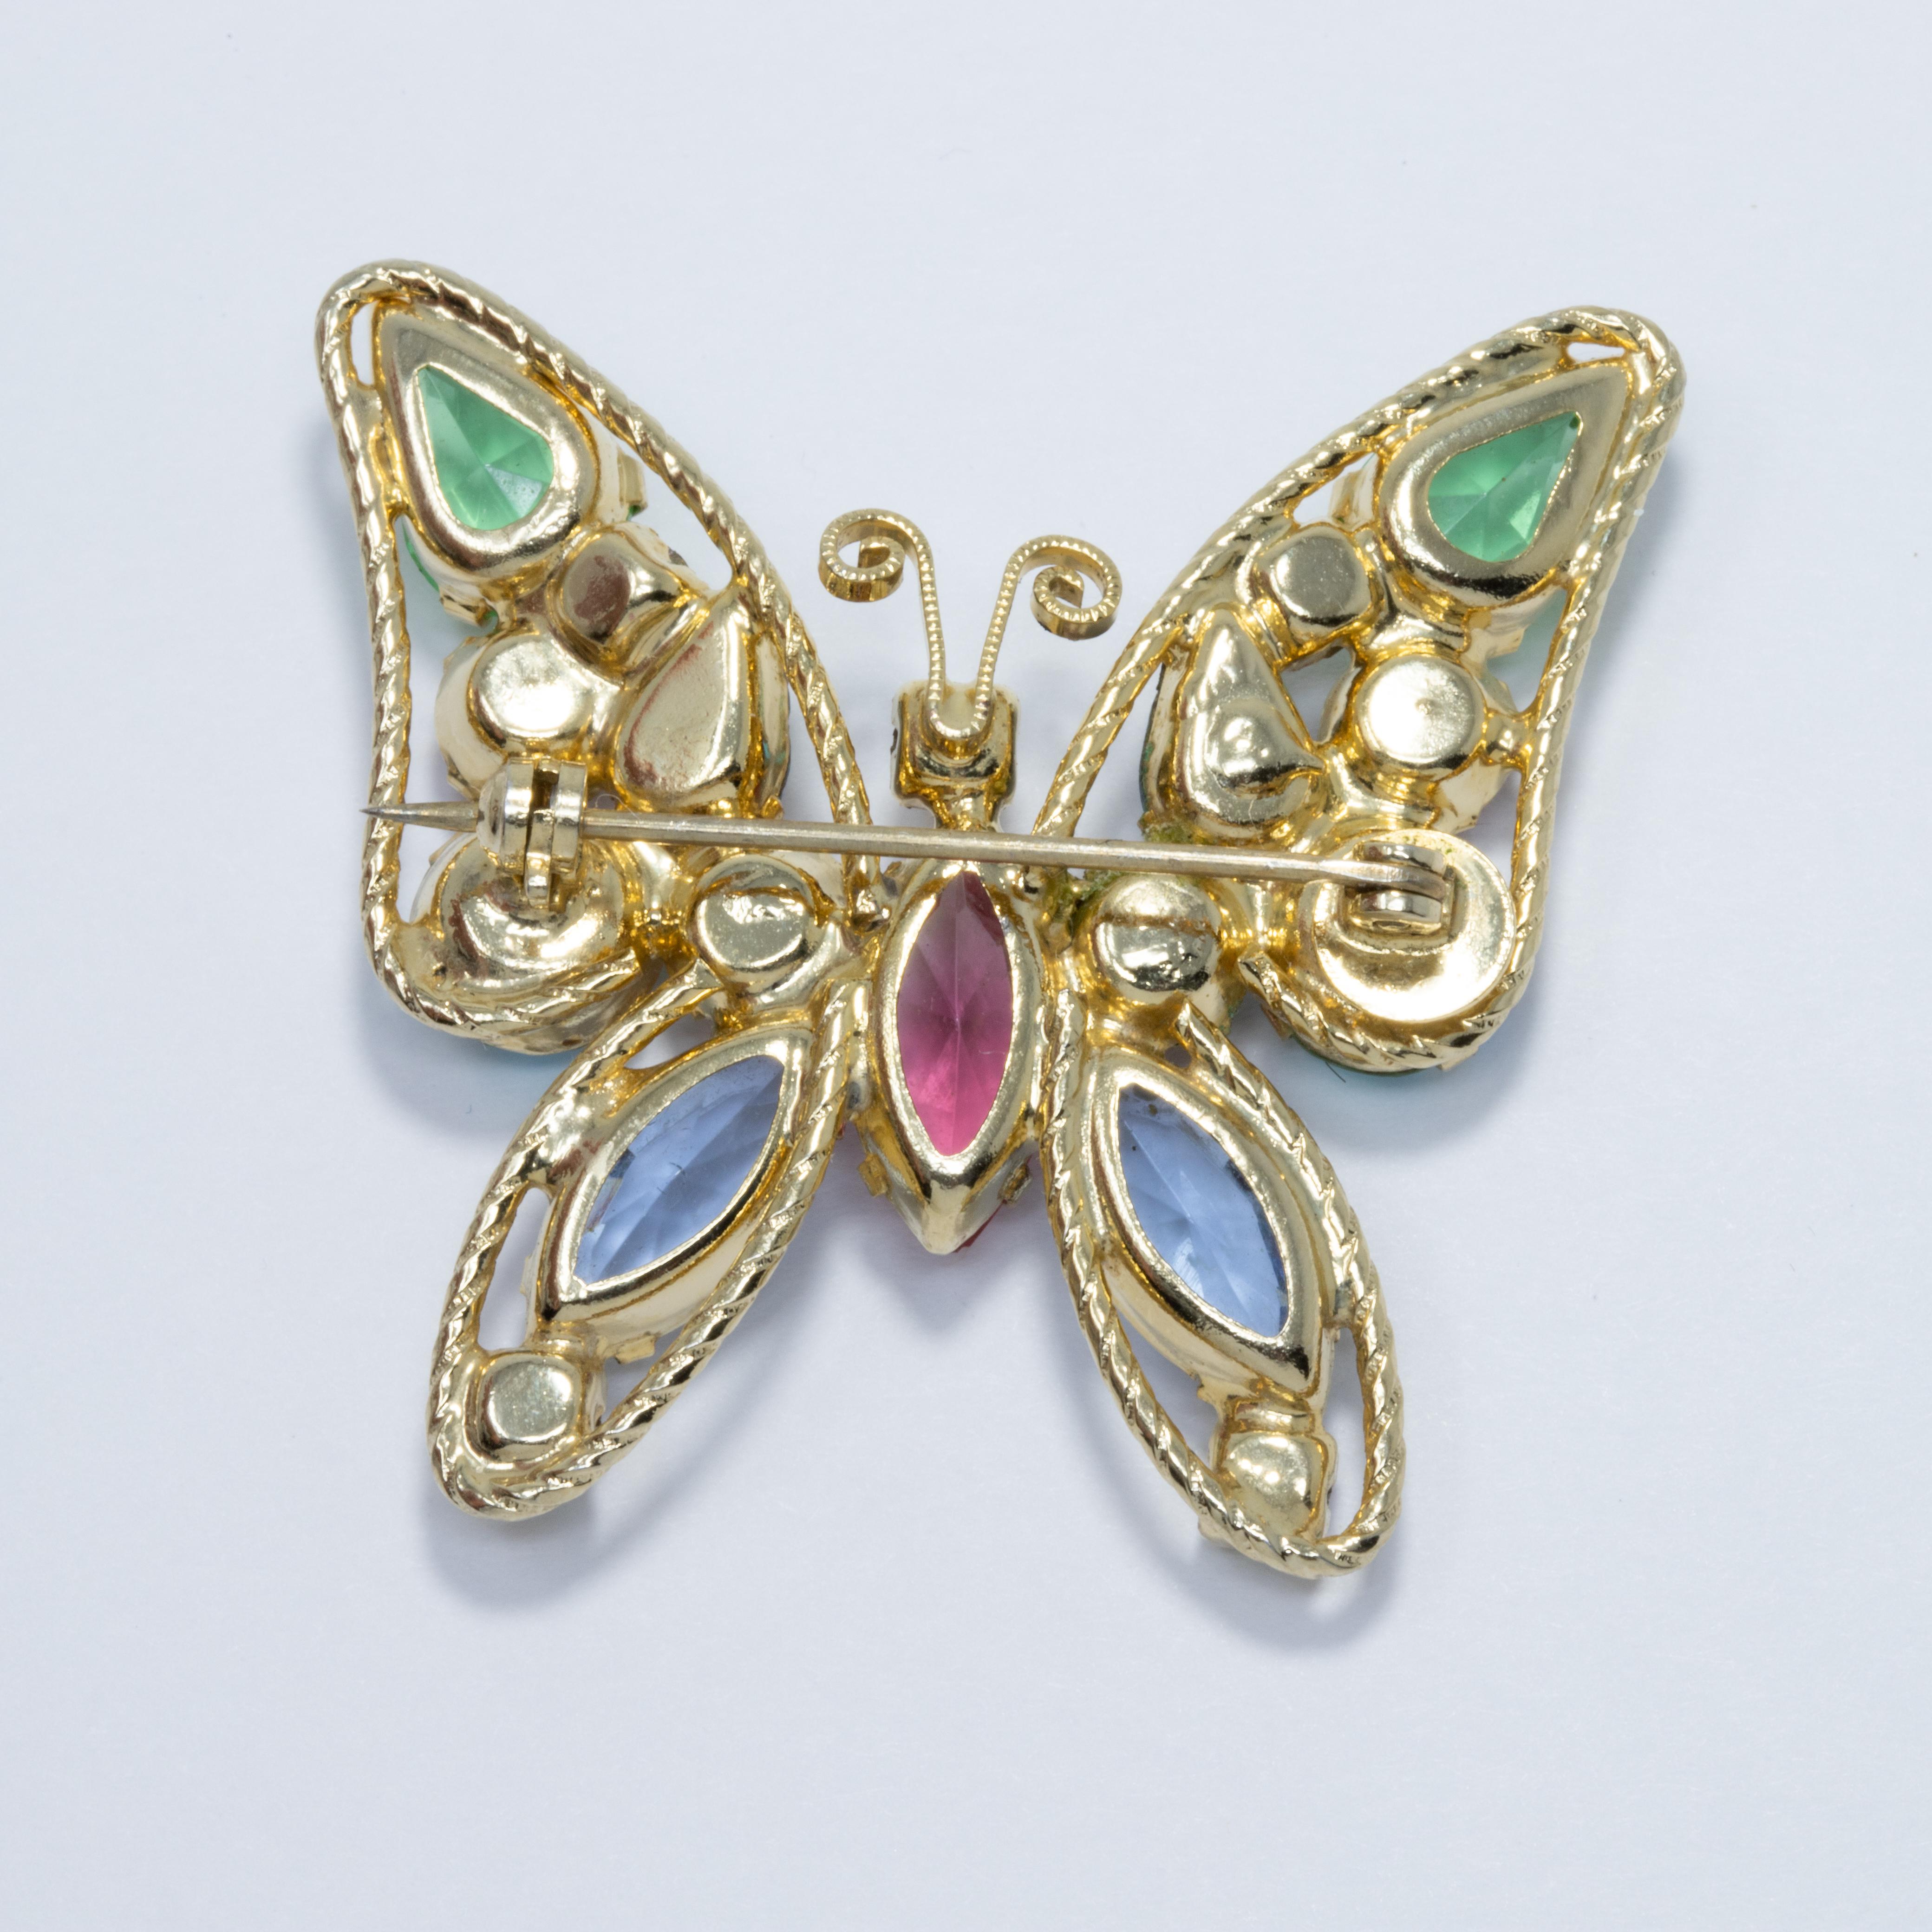 This gorgeous golden butterfly brooch is decorated with dazzling aquamarine, amethyst, topaz, emerald, and aurora borealis crystals.

All gems are prong-set, and some are open-back.

Circa mid-late 1900s. Gold plated. Designer unknown.
